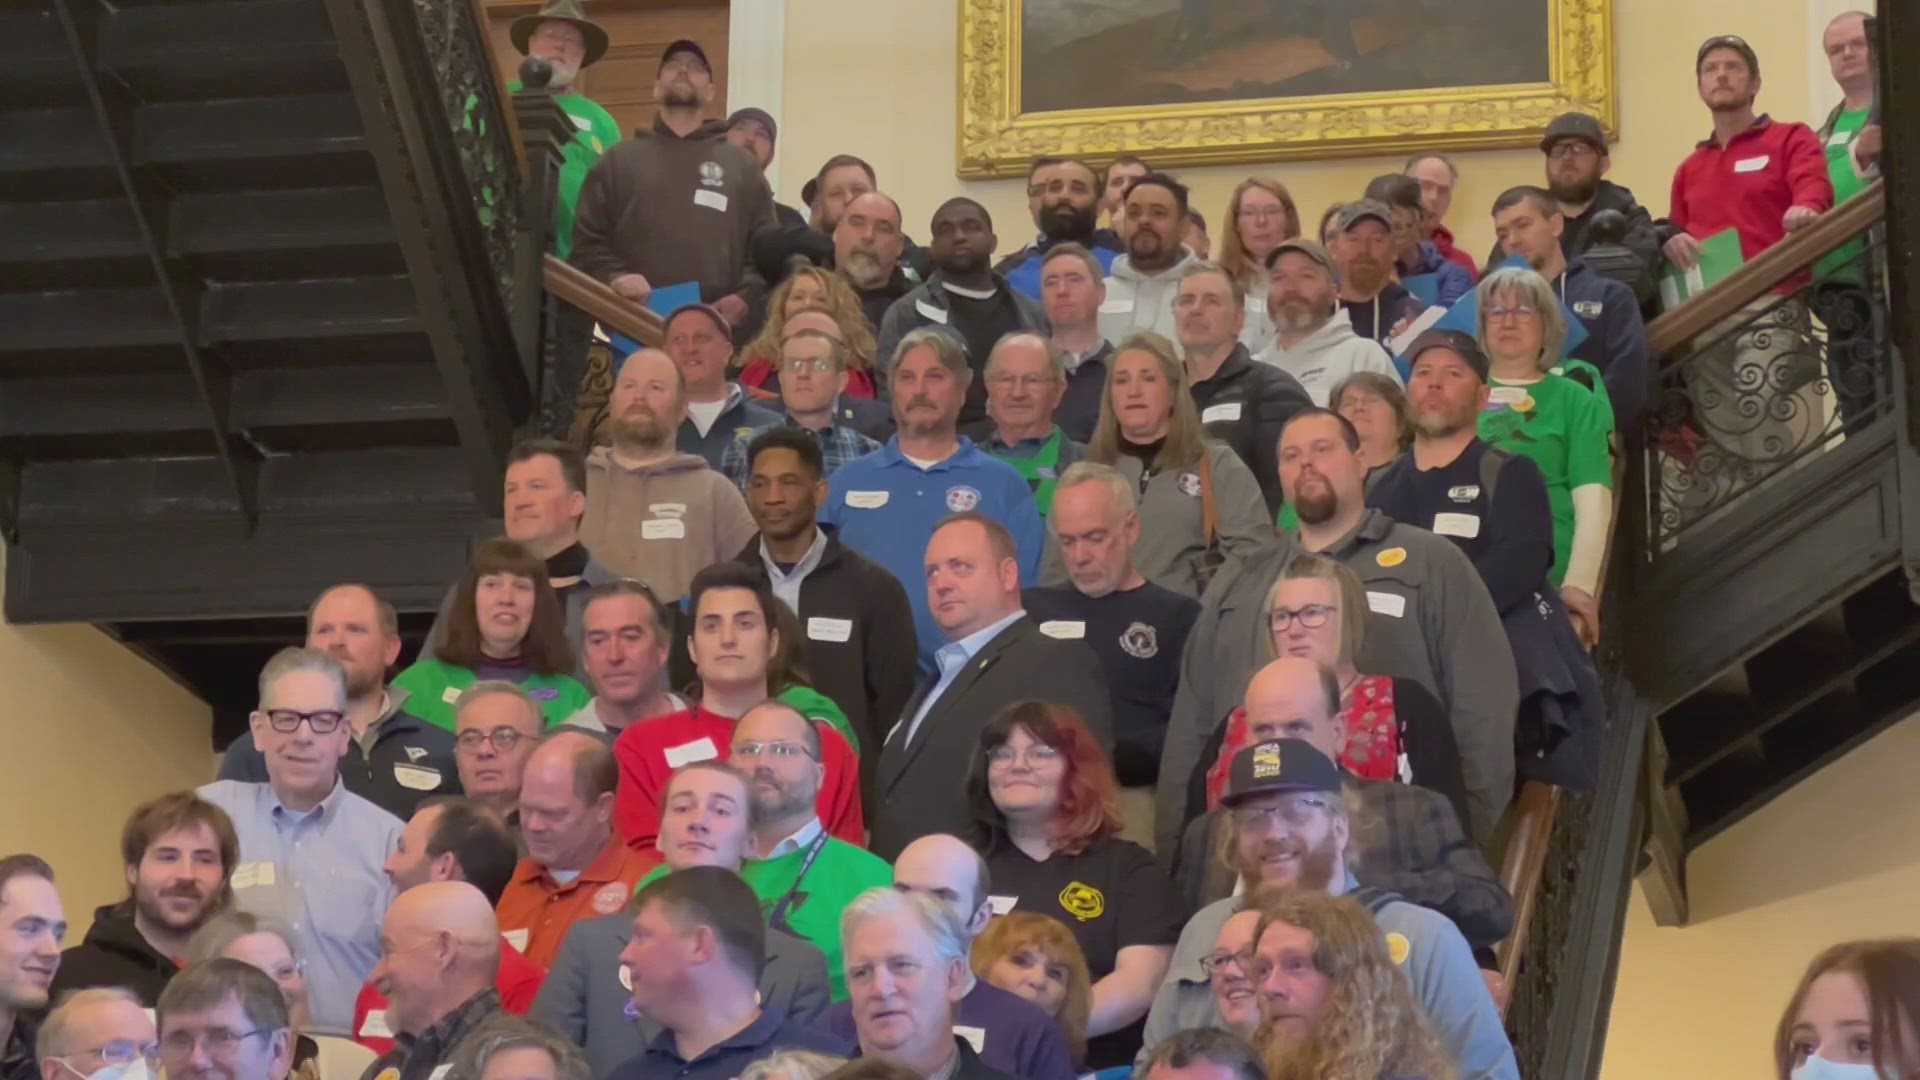 More than 200 union workers from across the state gathered in Augusta for the AFL-CIO's Labor Lobby Day on Thursday.